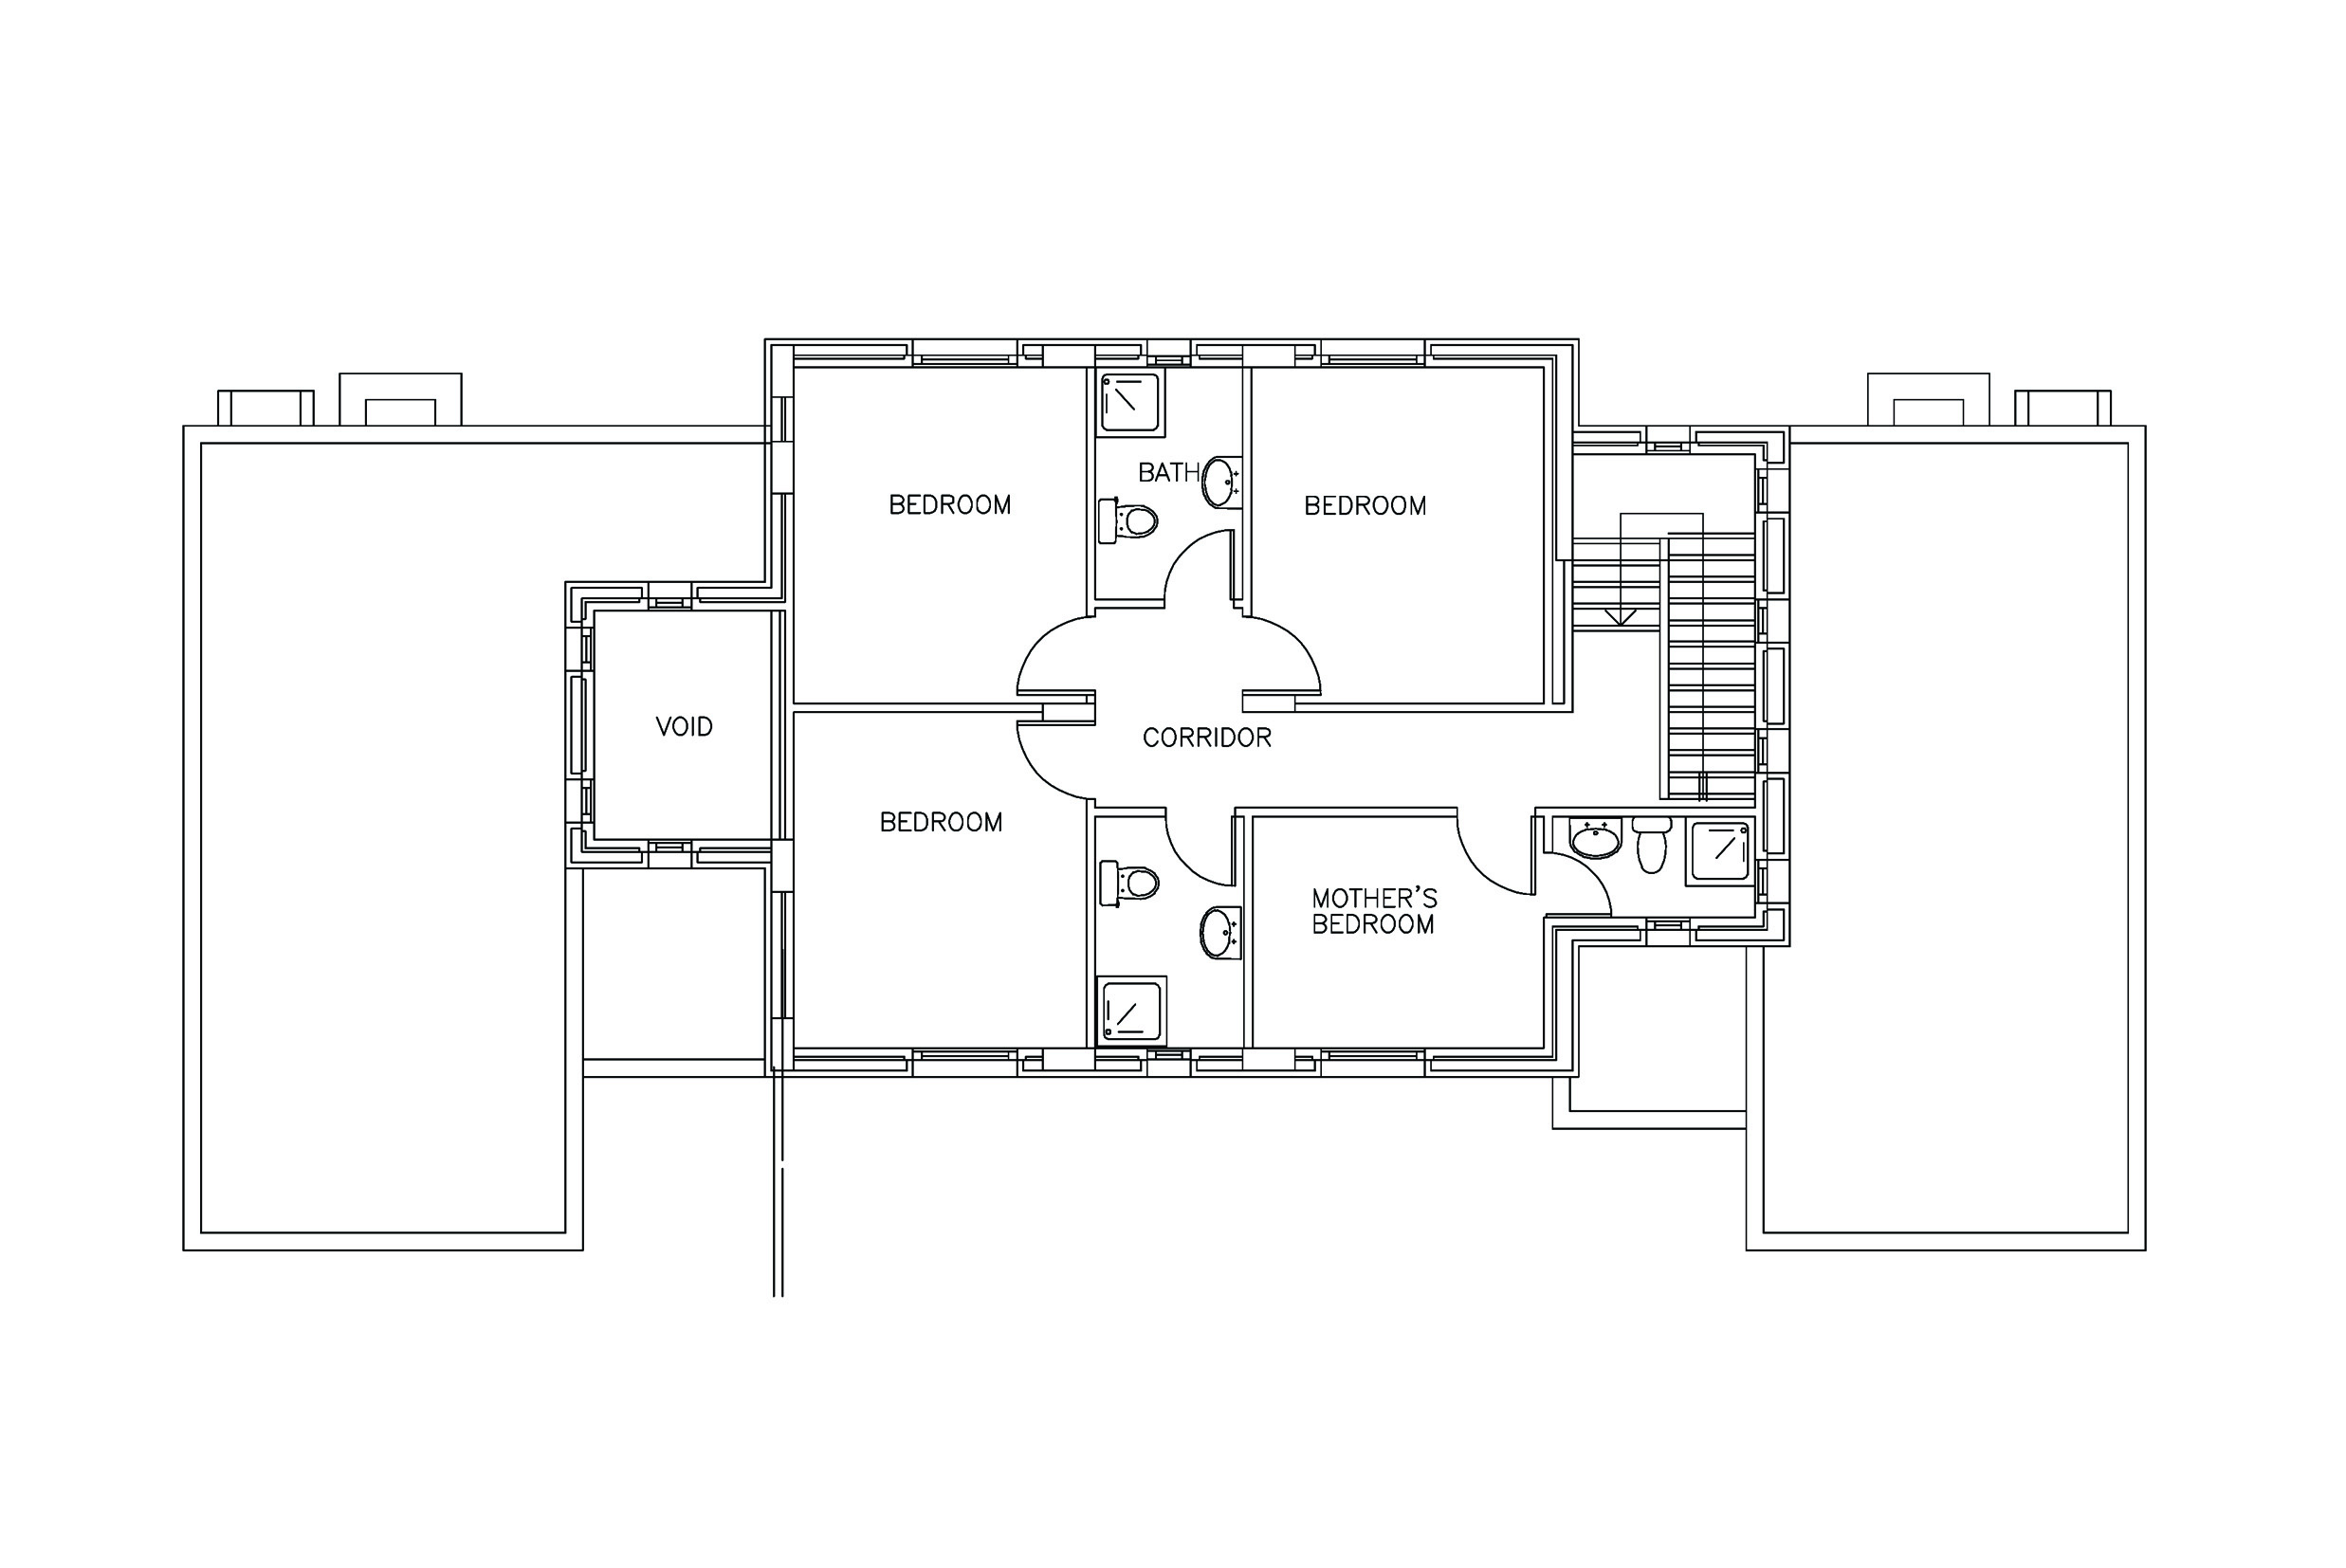 First floor plan, typical family house